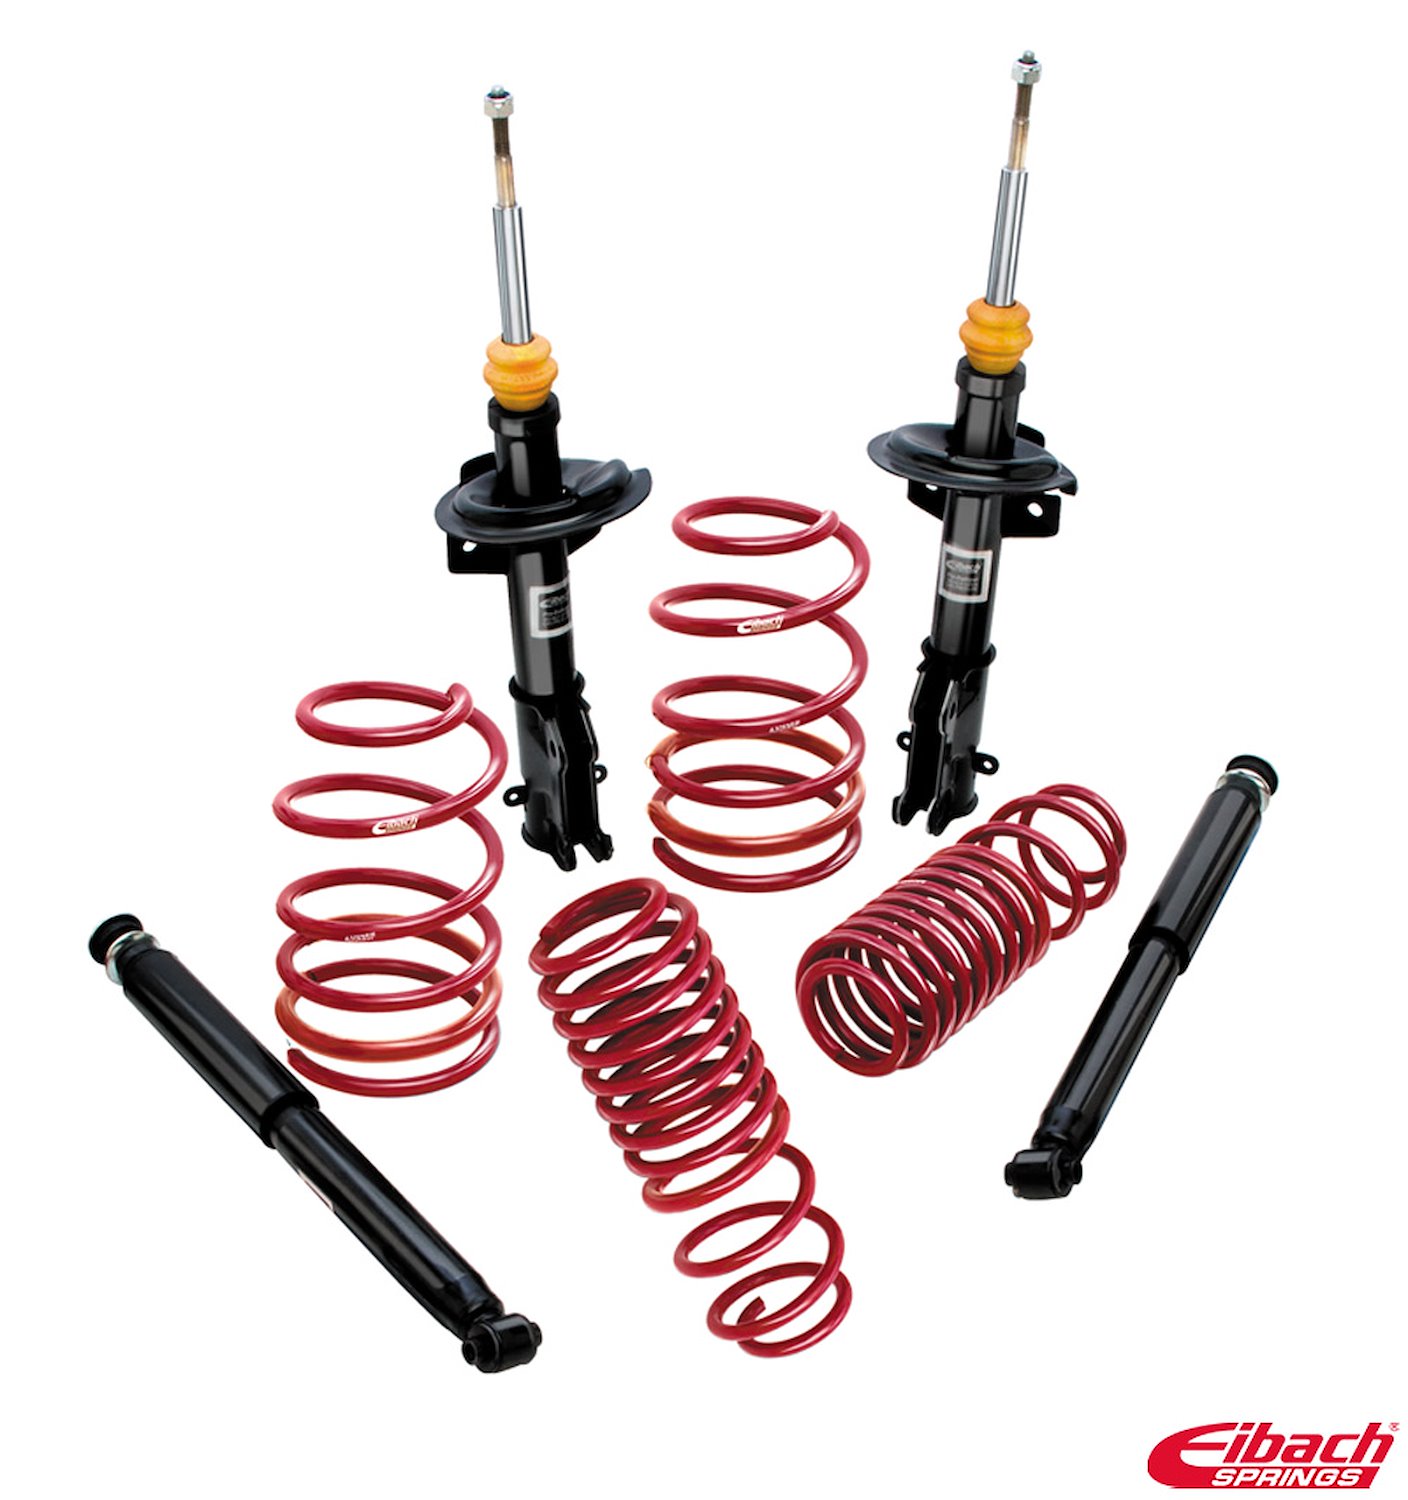 4.1035.780 Sport-System Performance Suspension System 1979-93 Mustang V8 Coupe - 1.7" Front/1.5" Rear Drop